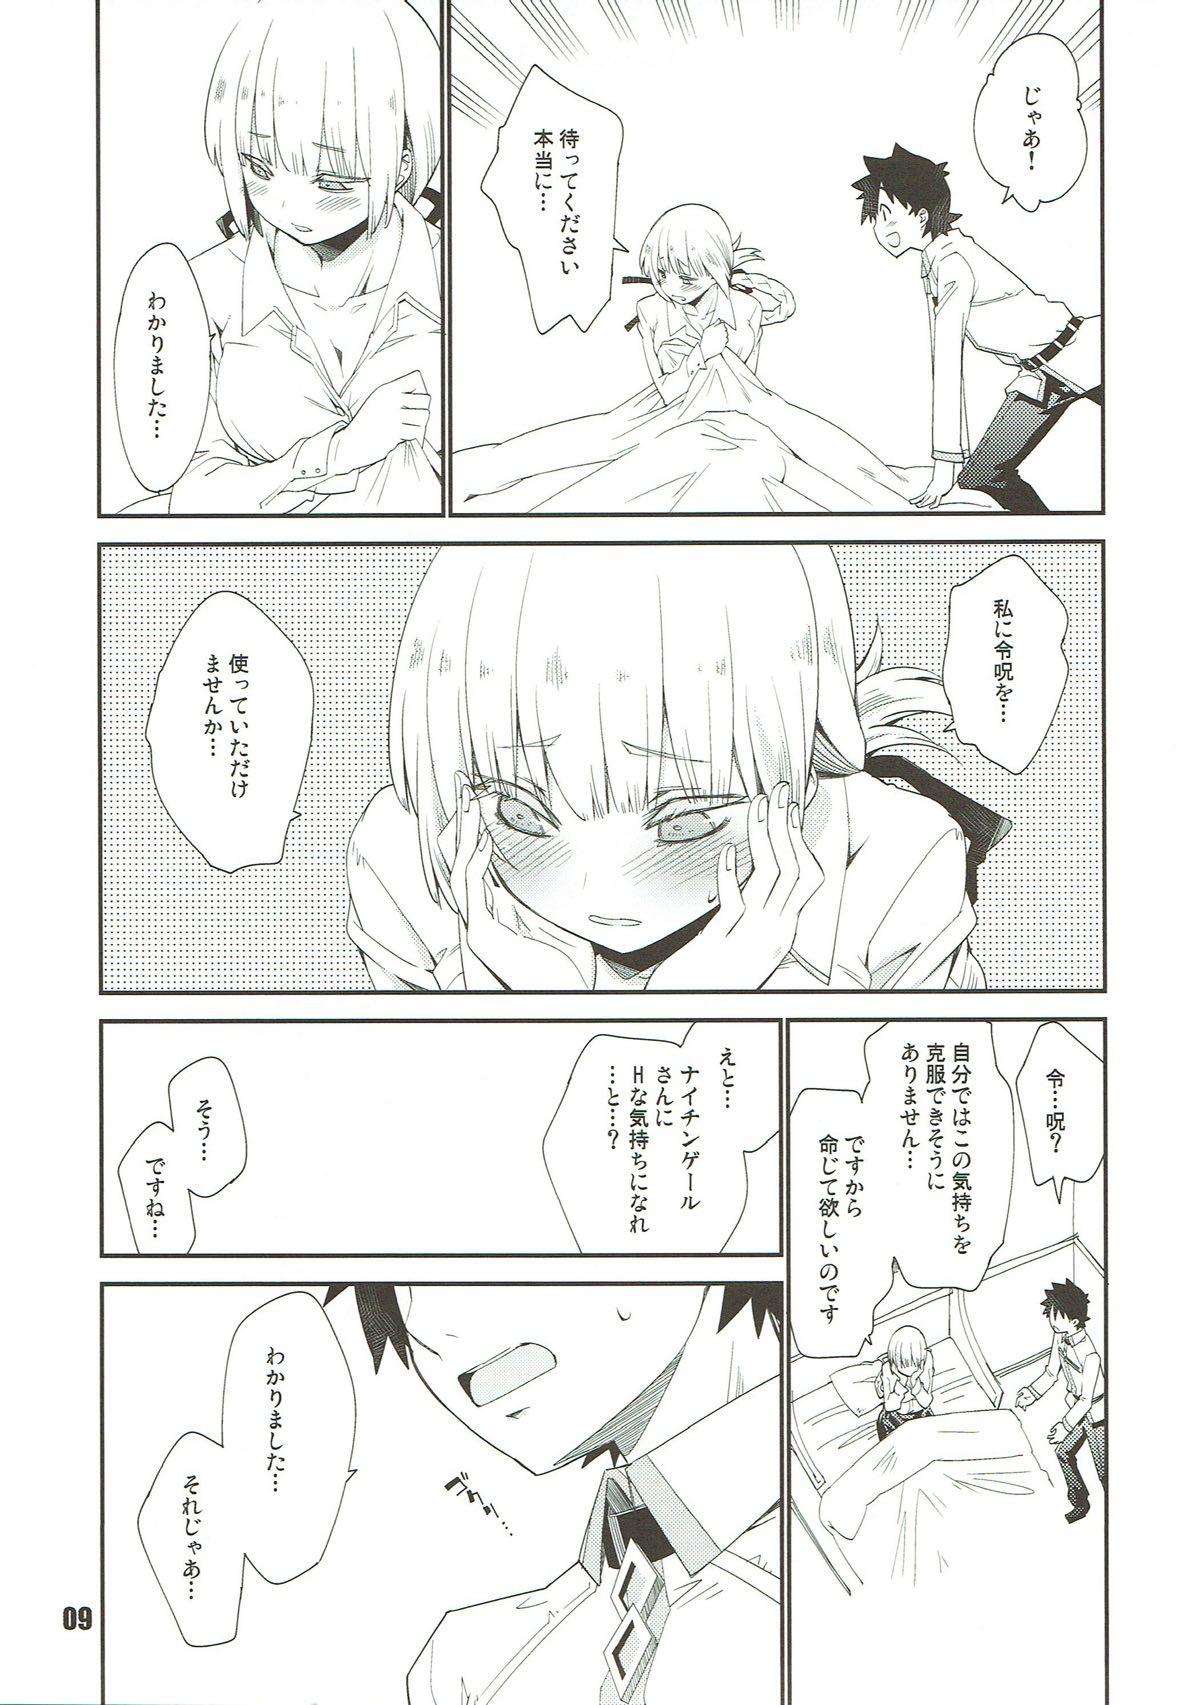 Squirters Nightingale Syndrome - Fate grand order Sola - Page 8